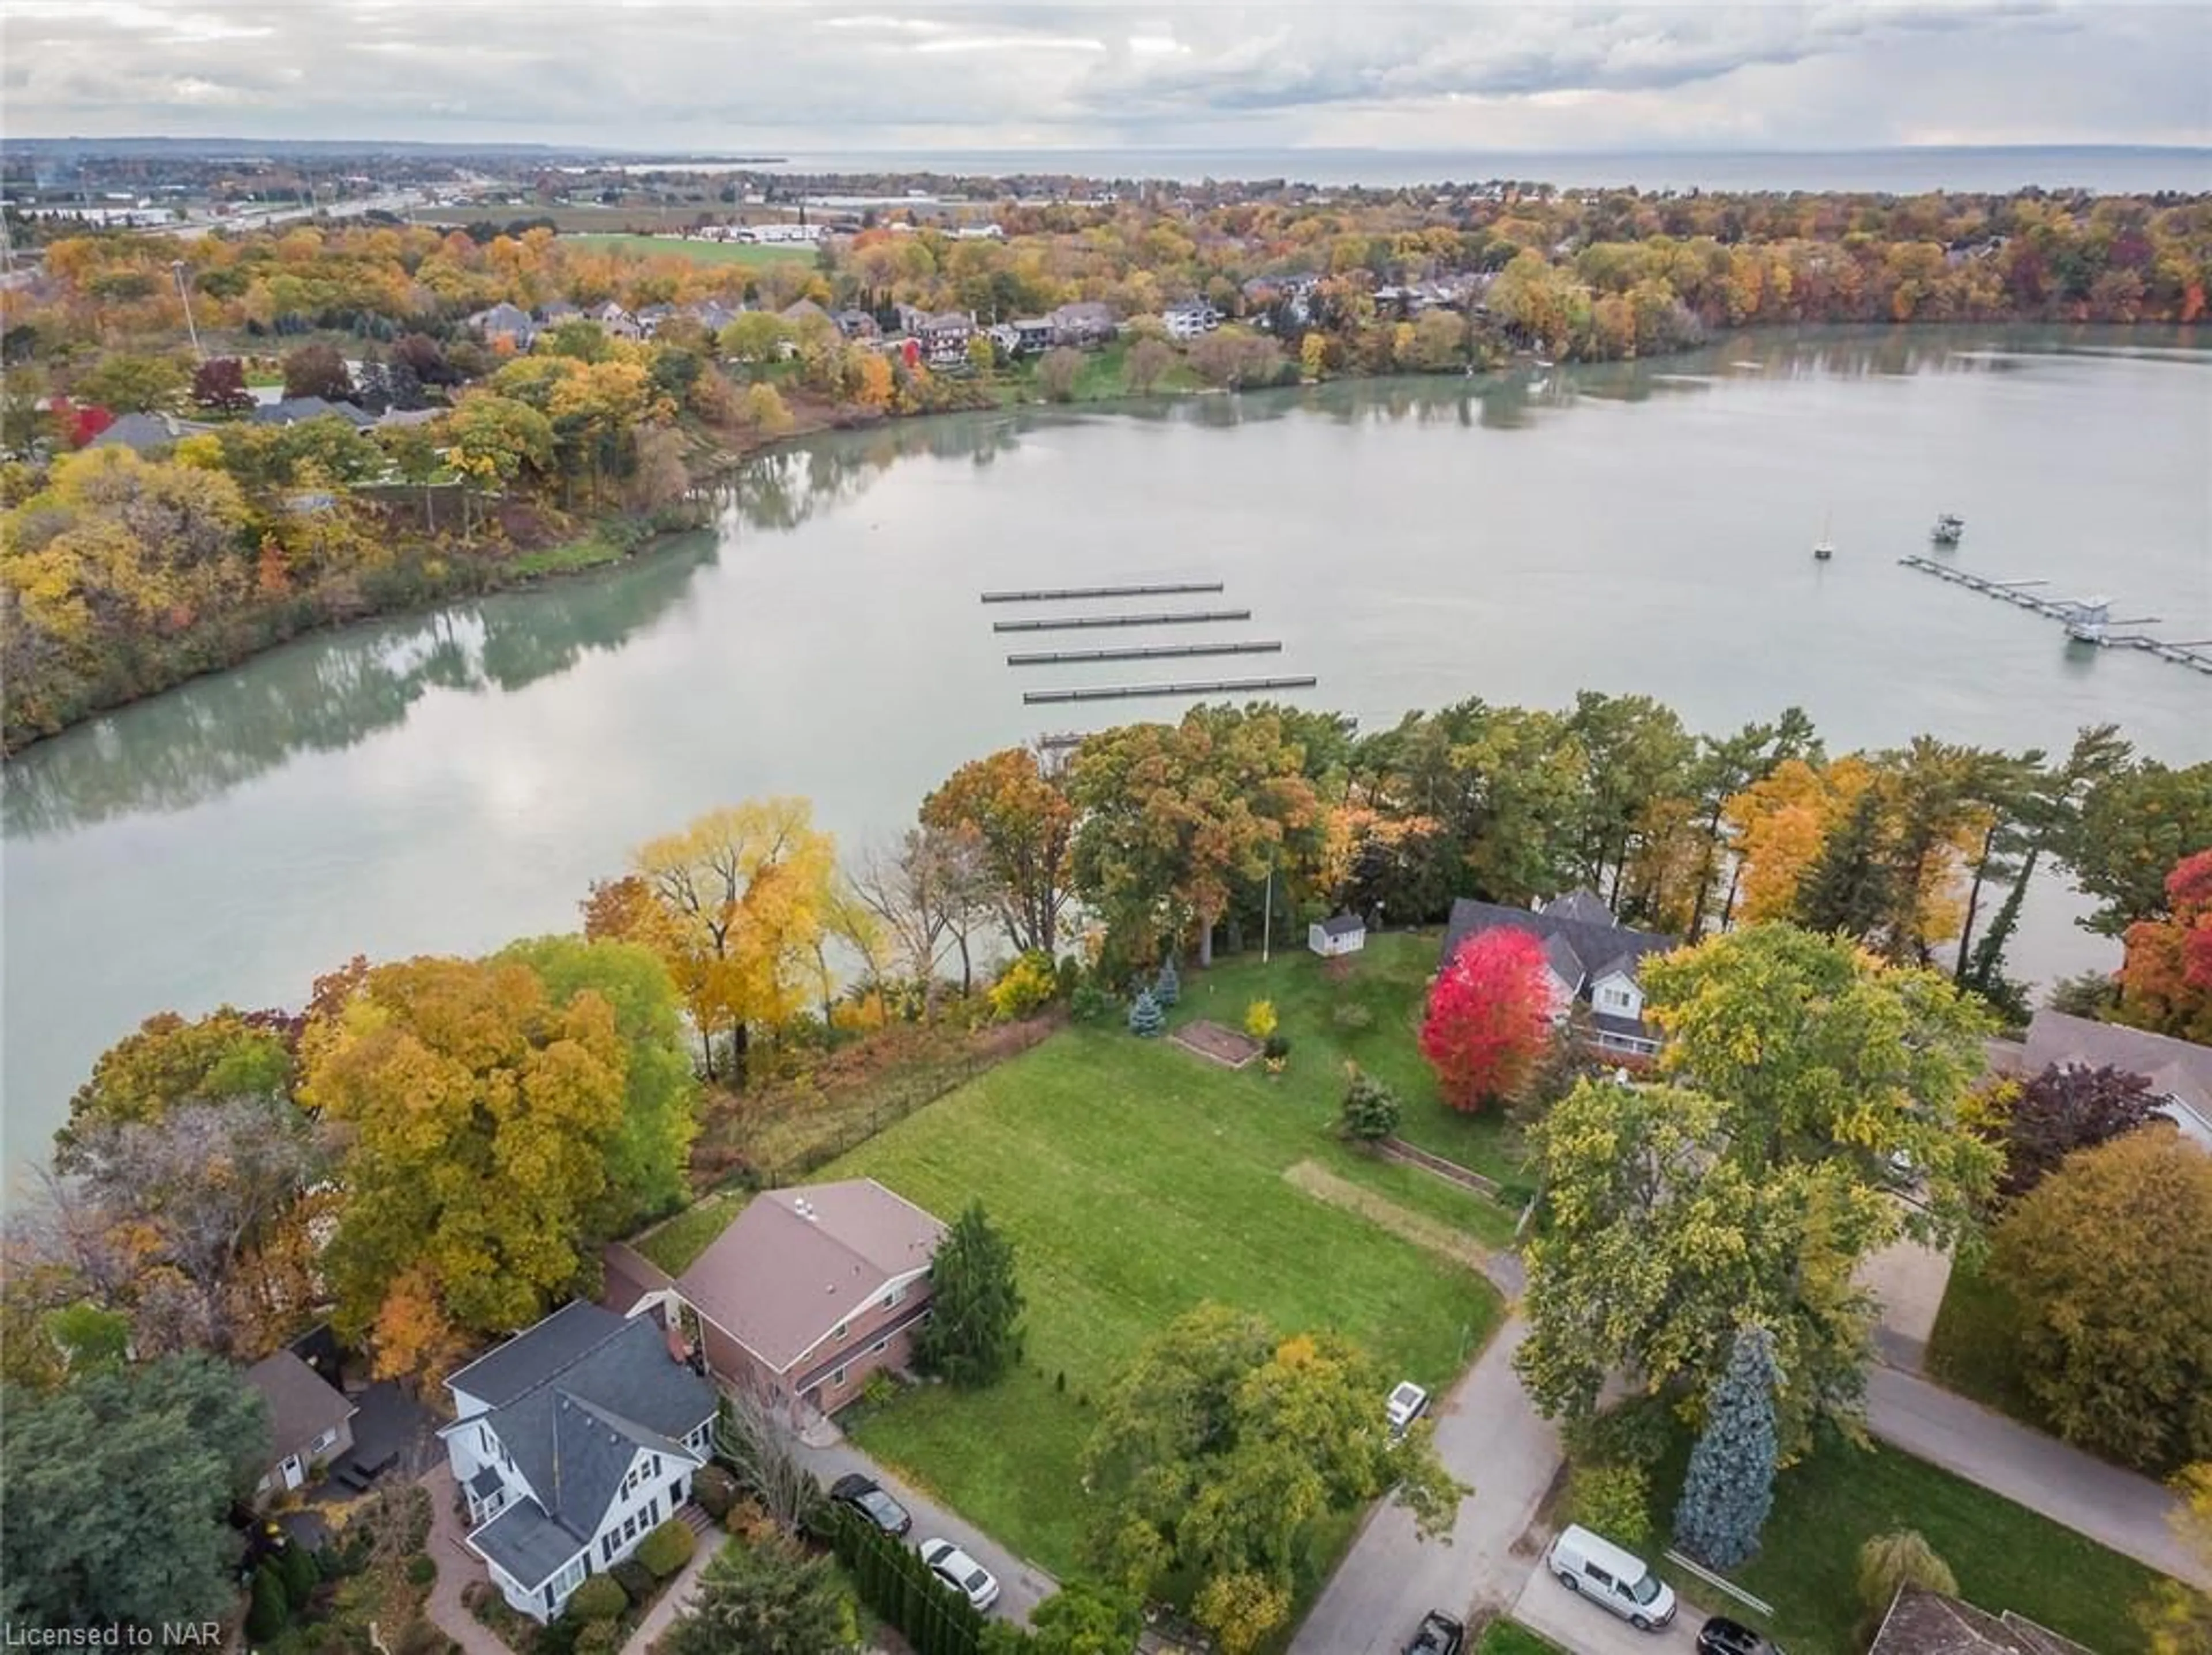 Lakeview for 56A Henley Dr, St. Catharines Ontario L2N 4A9